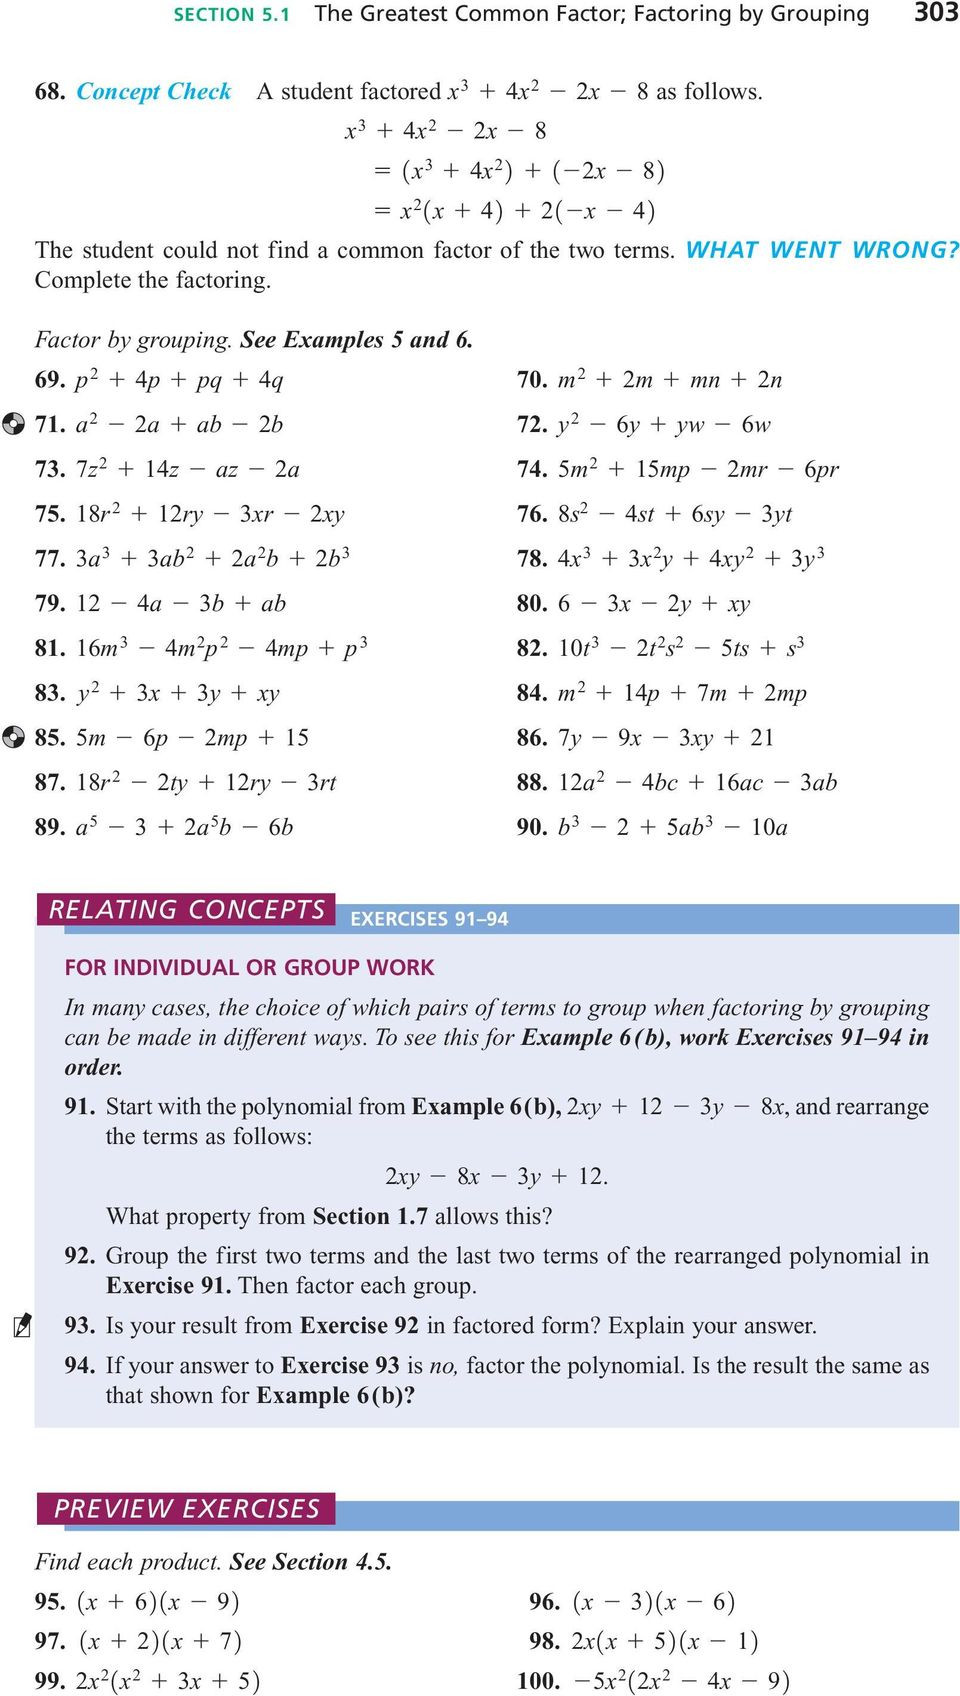 Factoring by Grouping Worksheet Answers the Greatest Mon Factor Factoring by Grouping Pdf Free